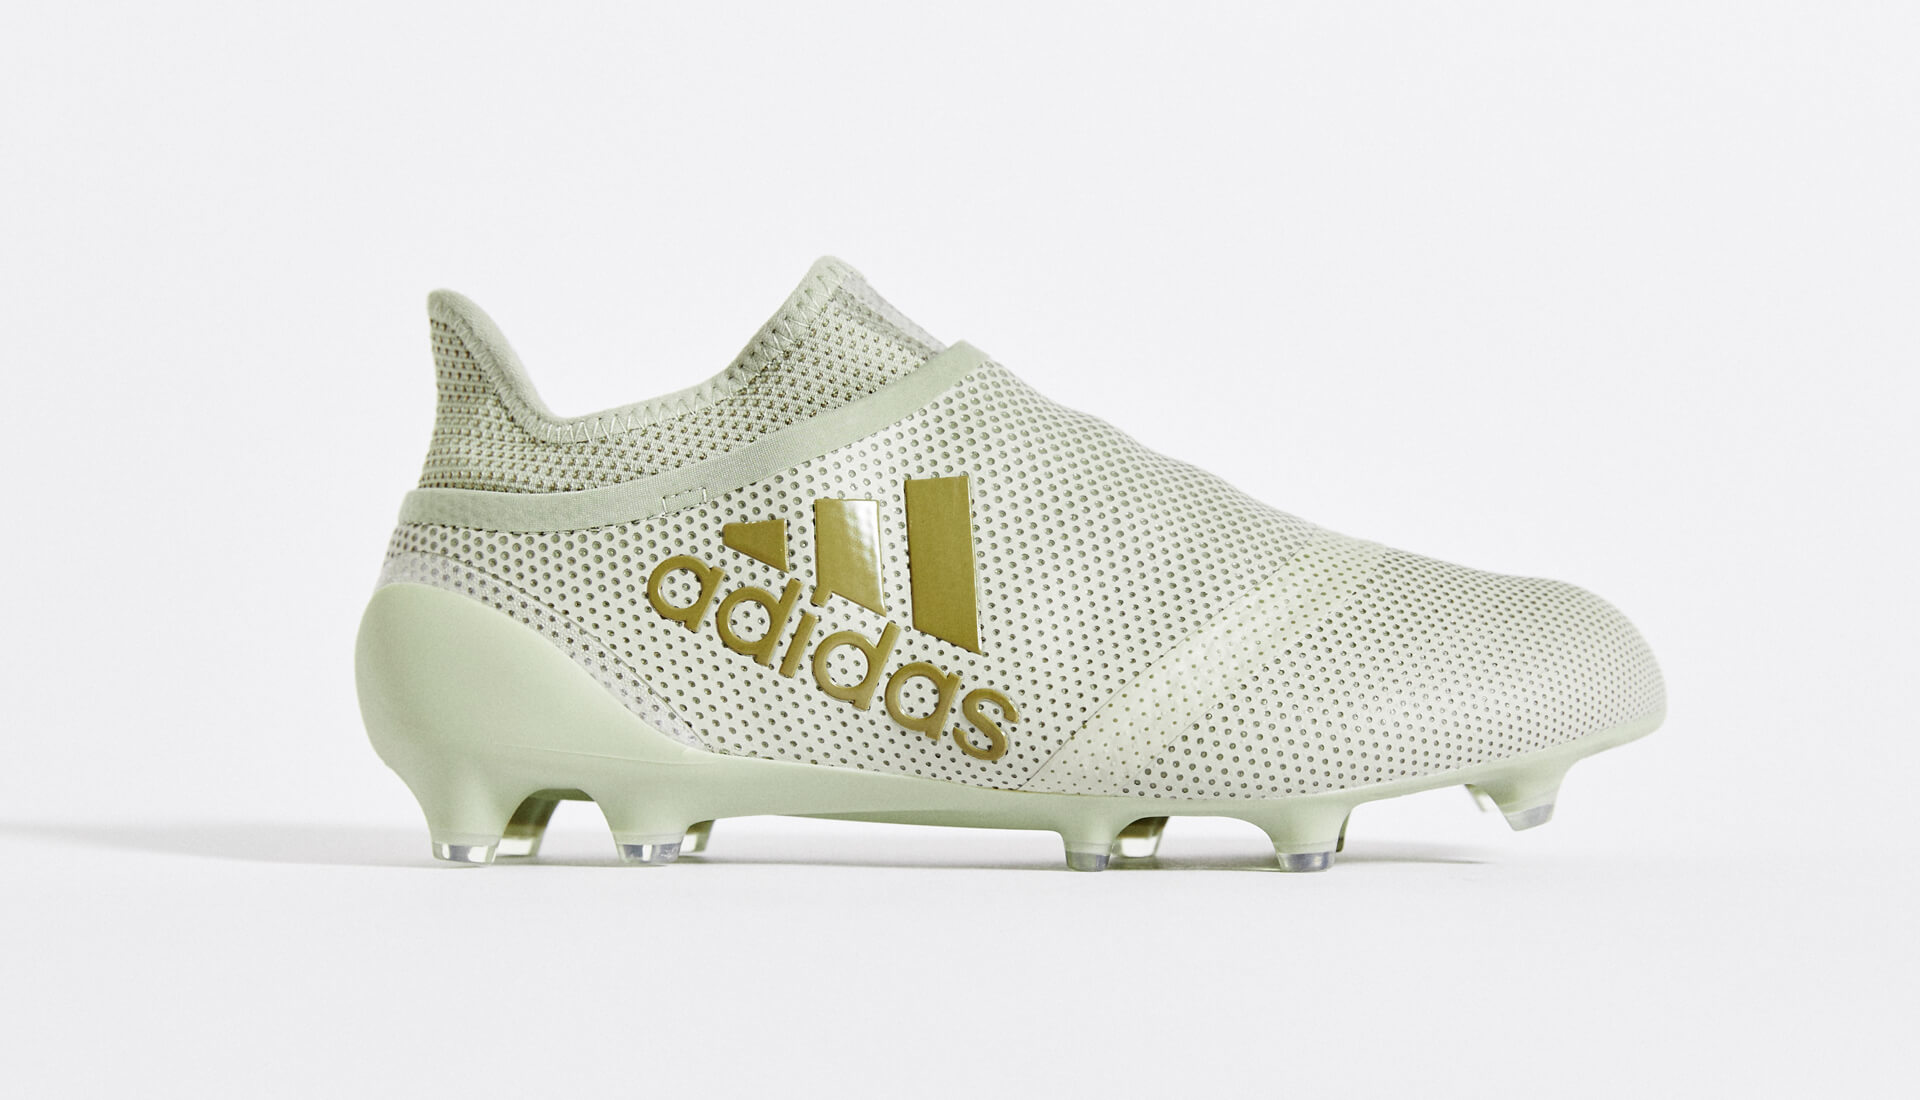 adidas Launch "Earth Storm" Pack Football Boots -